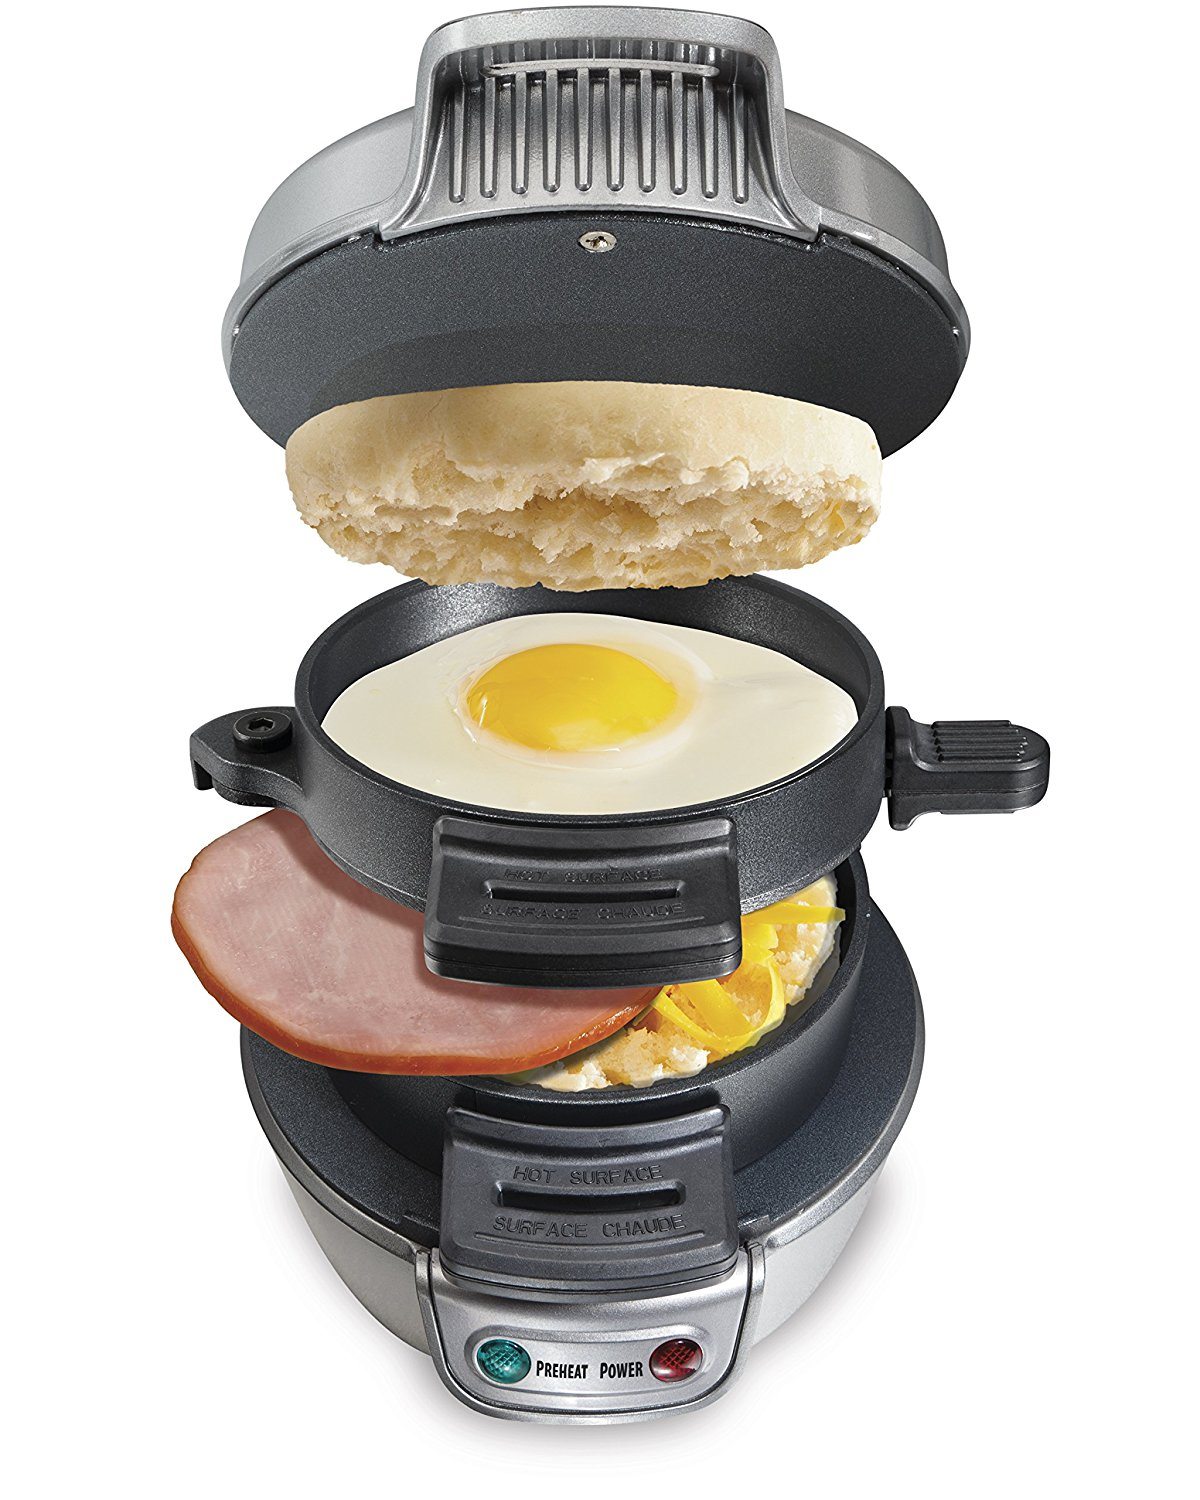 Father's Day Gift Ideas | Gifts For Dad | Gifts For Men | Breakfast Sandwich Maker